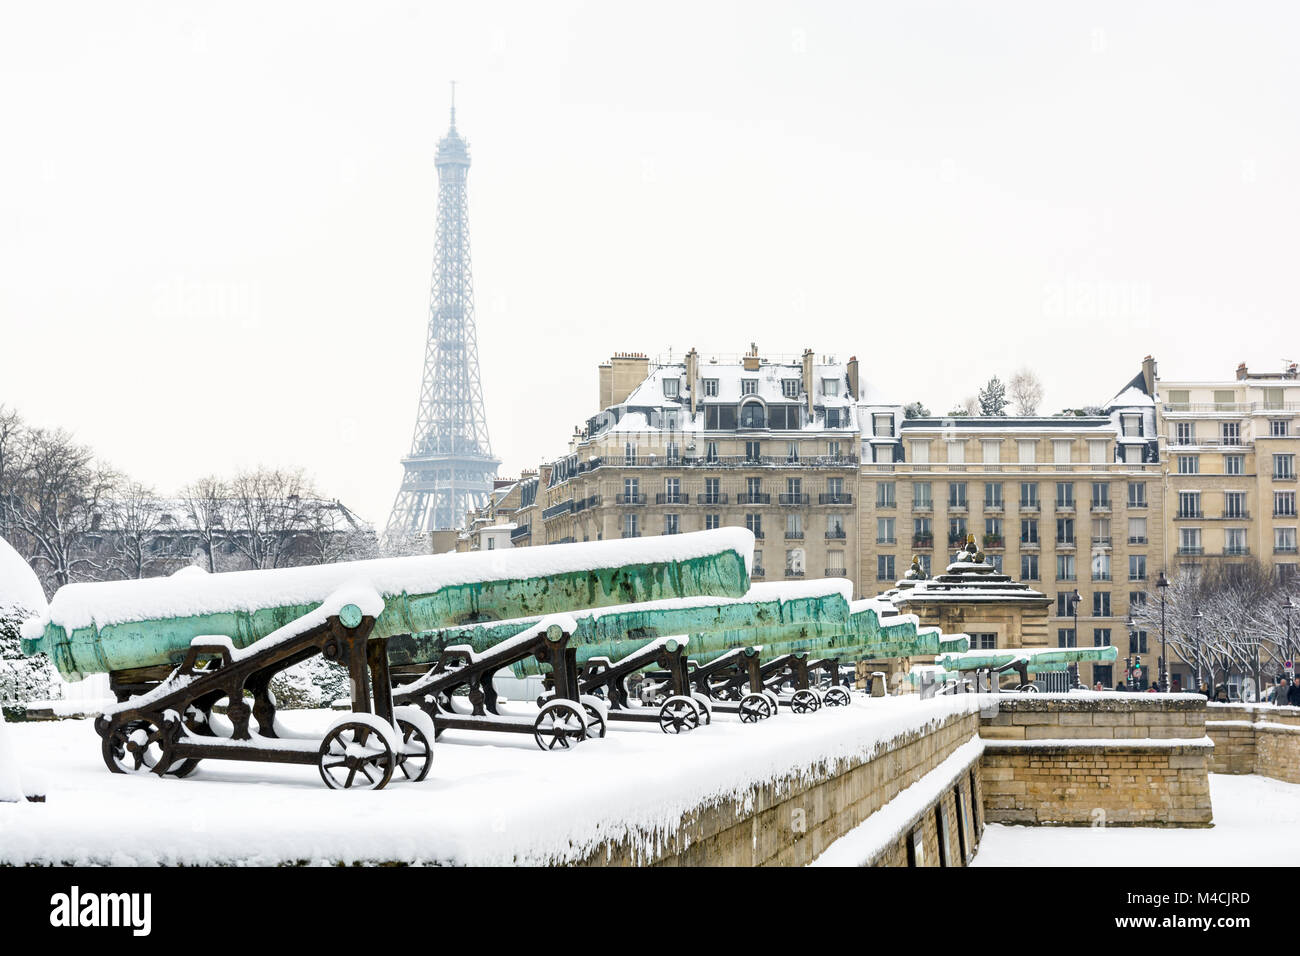 Winter in Paris in the snow. The row of bronze cannons of the Place des Invalides with a parisian building and the Eiffel tower in the background. Stock Photo